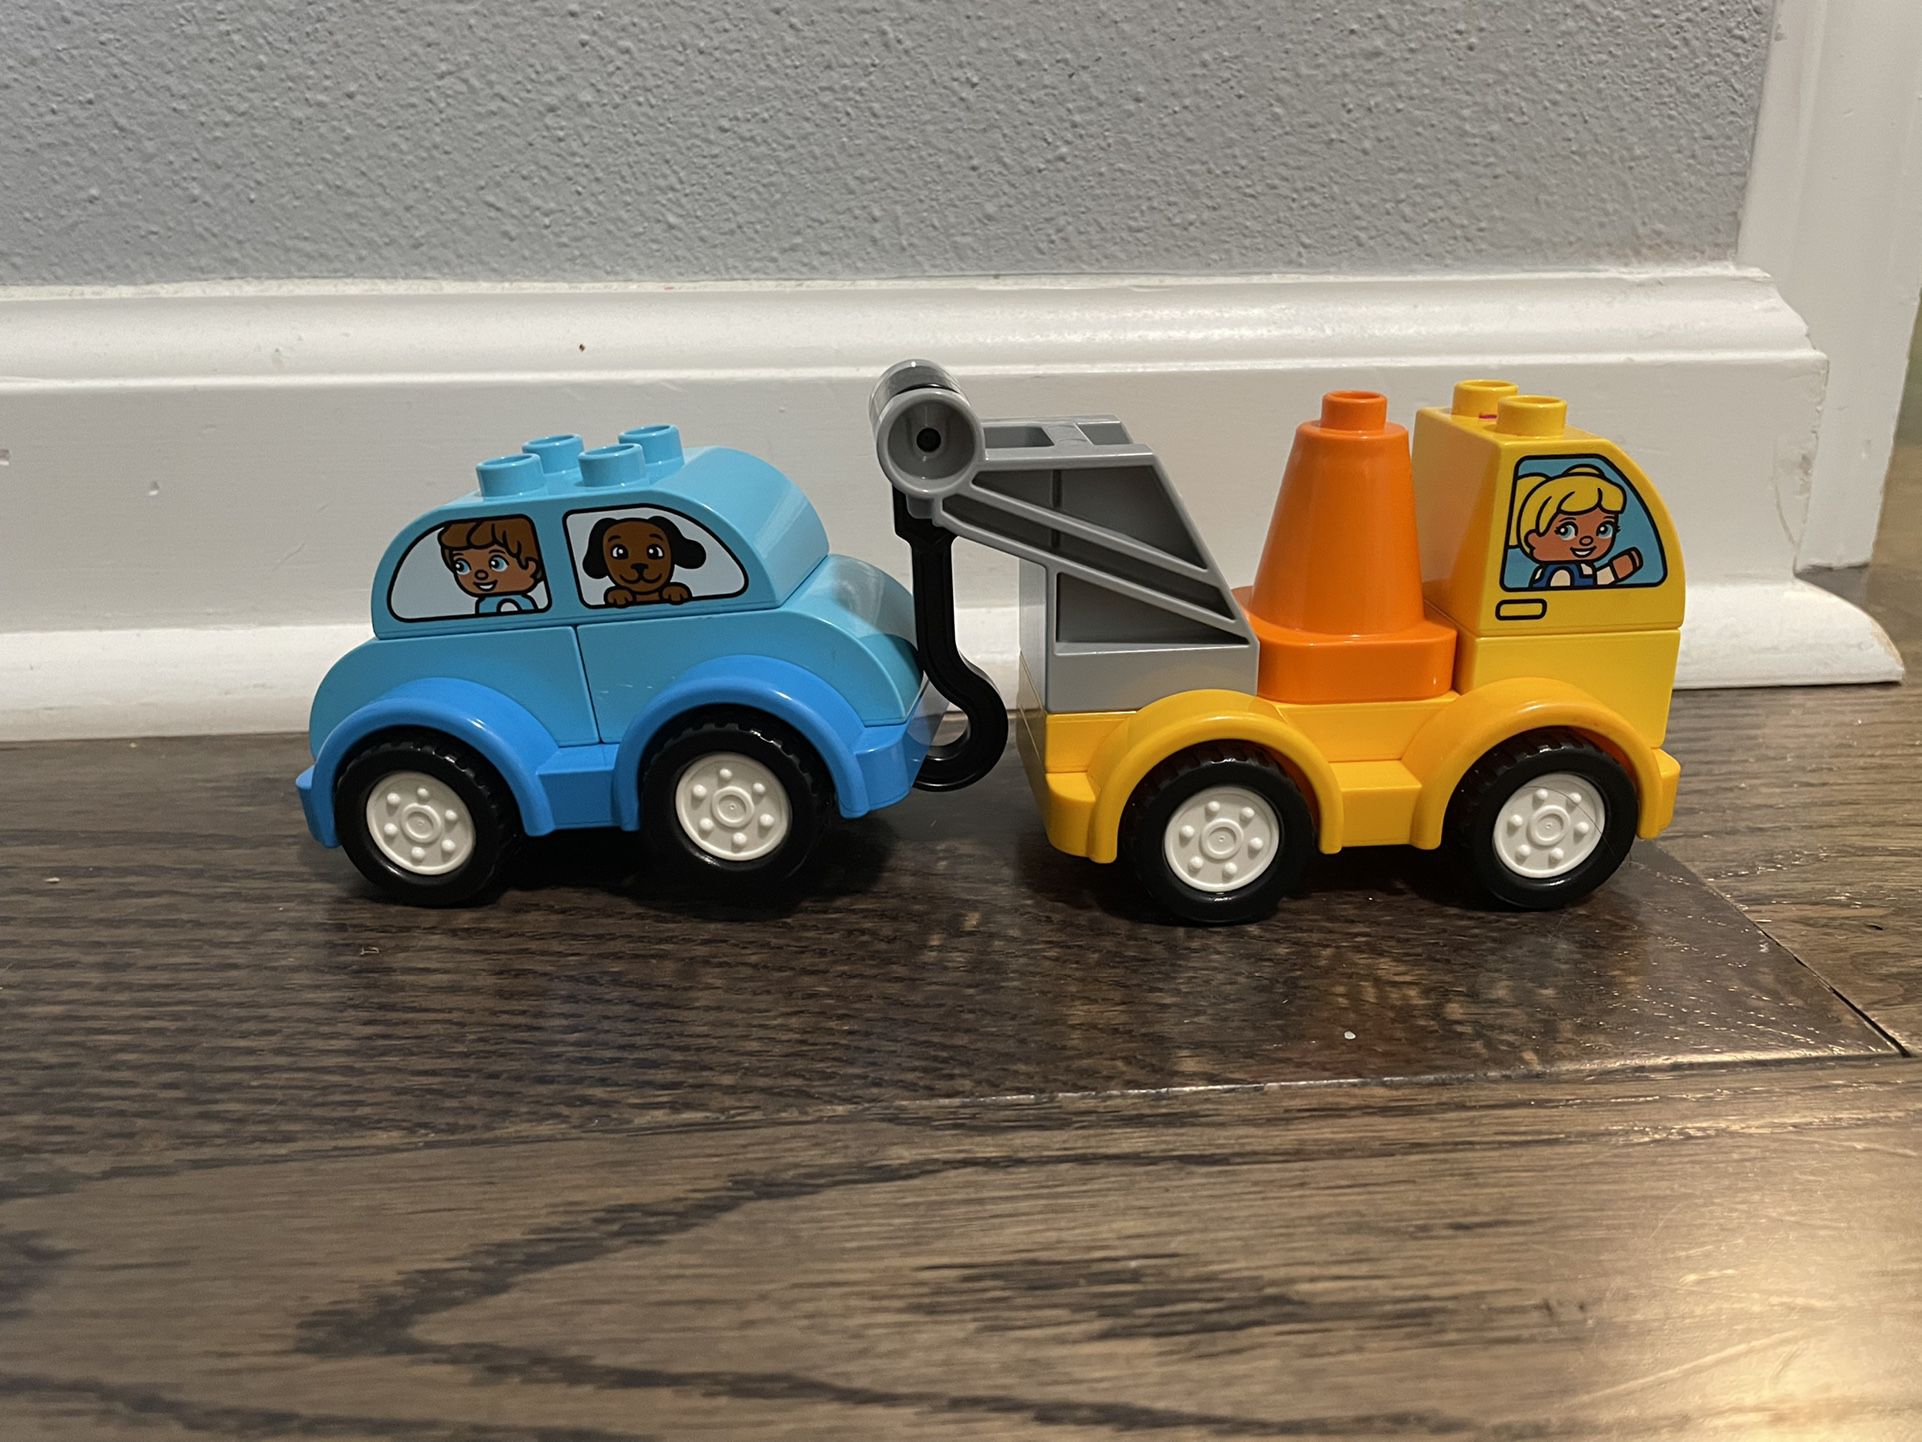 Lego Duplo Tow Truck Set for in Carnation, - OfferUp